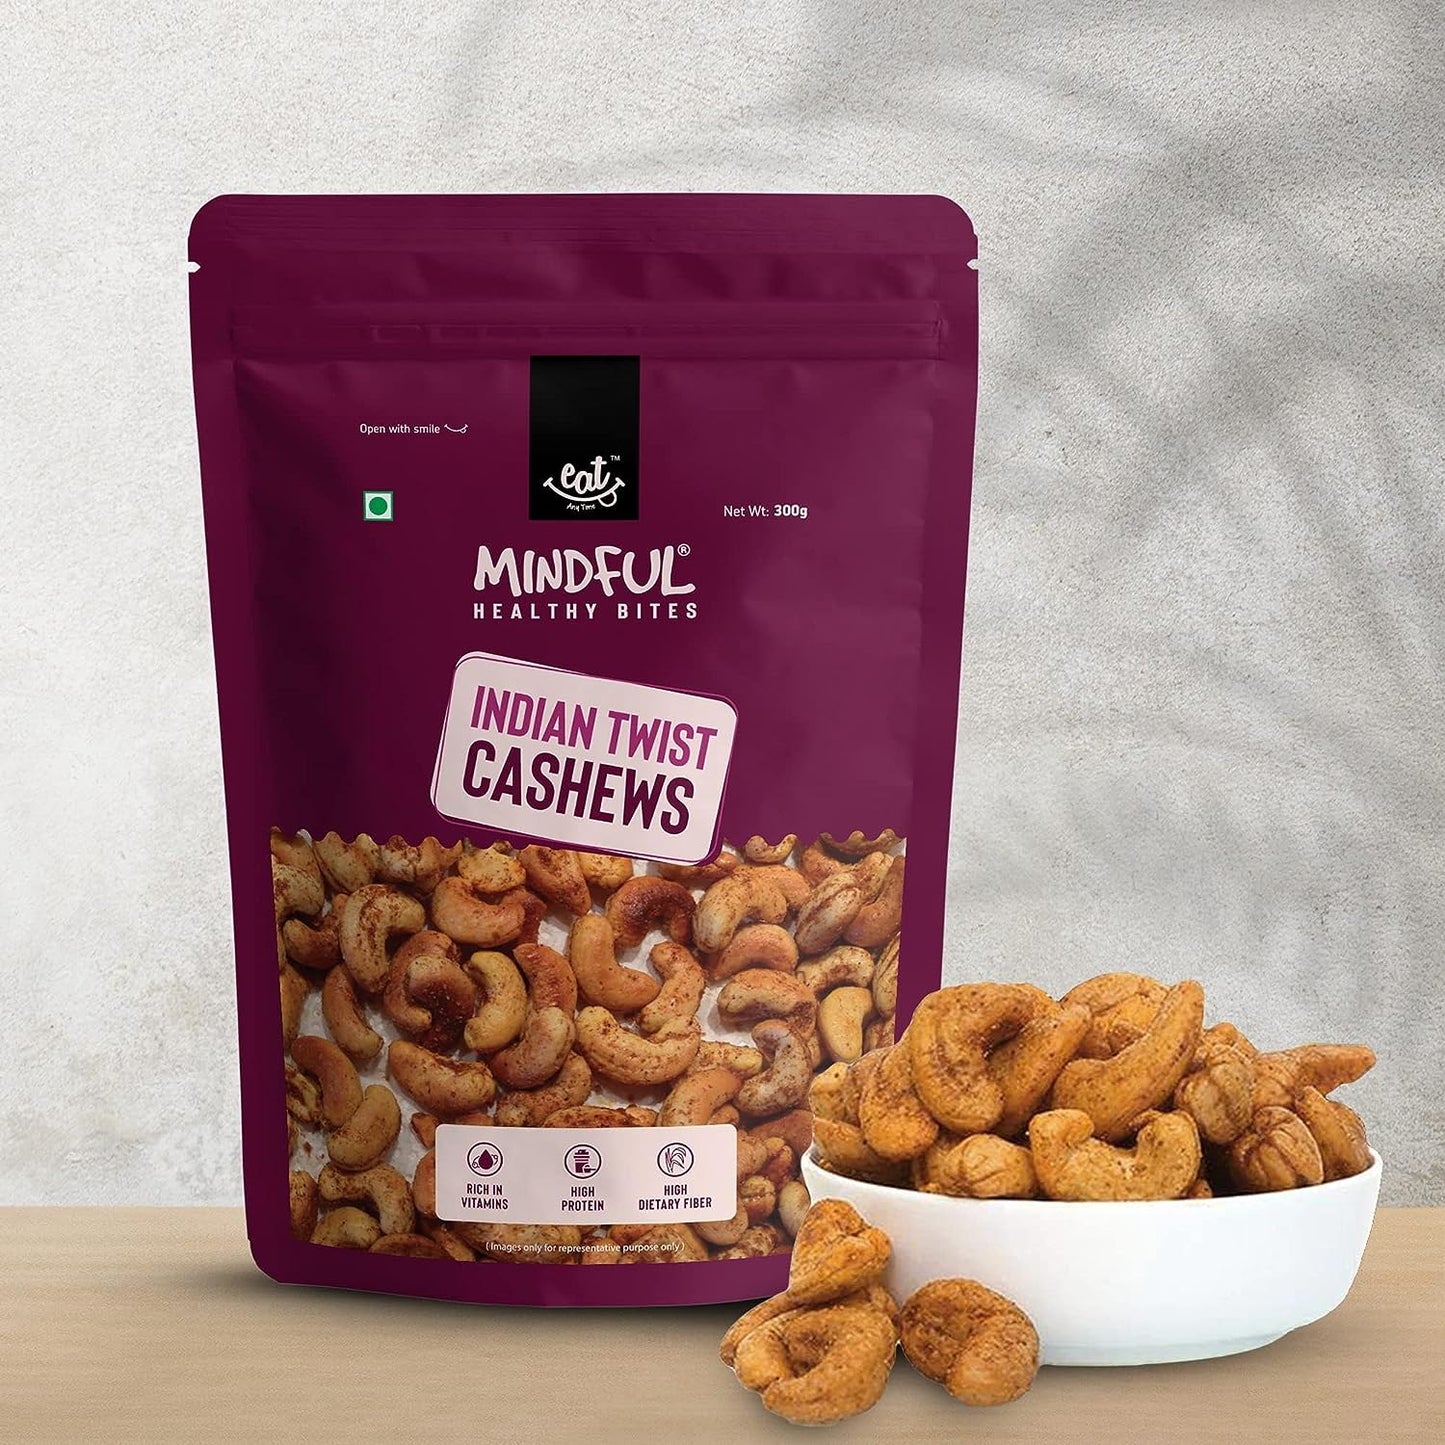 Indian Twist Cashew Price Online - EAT Anytime